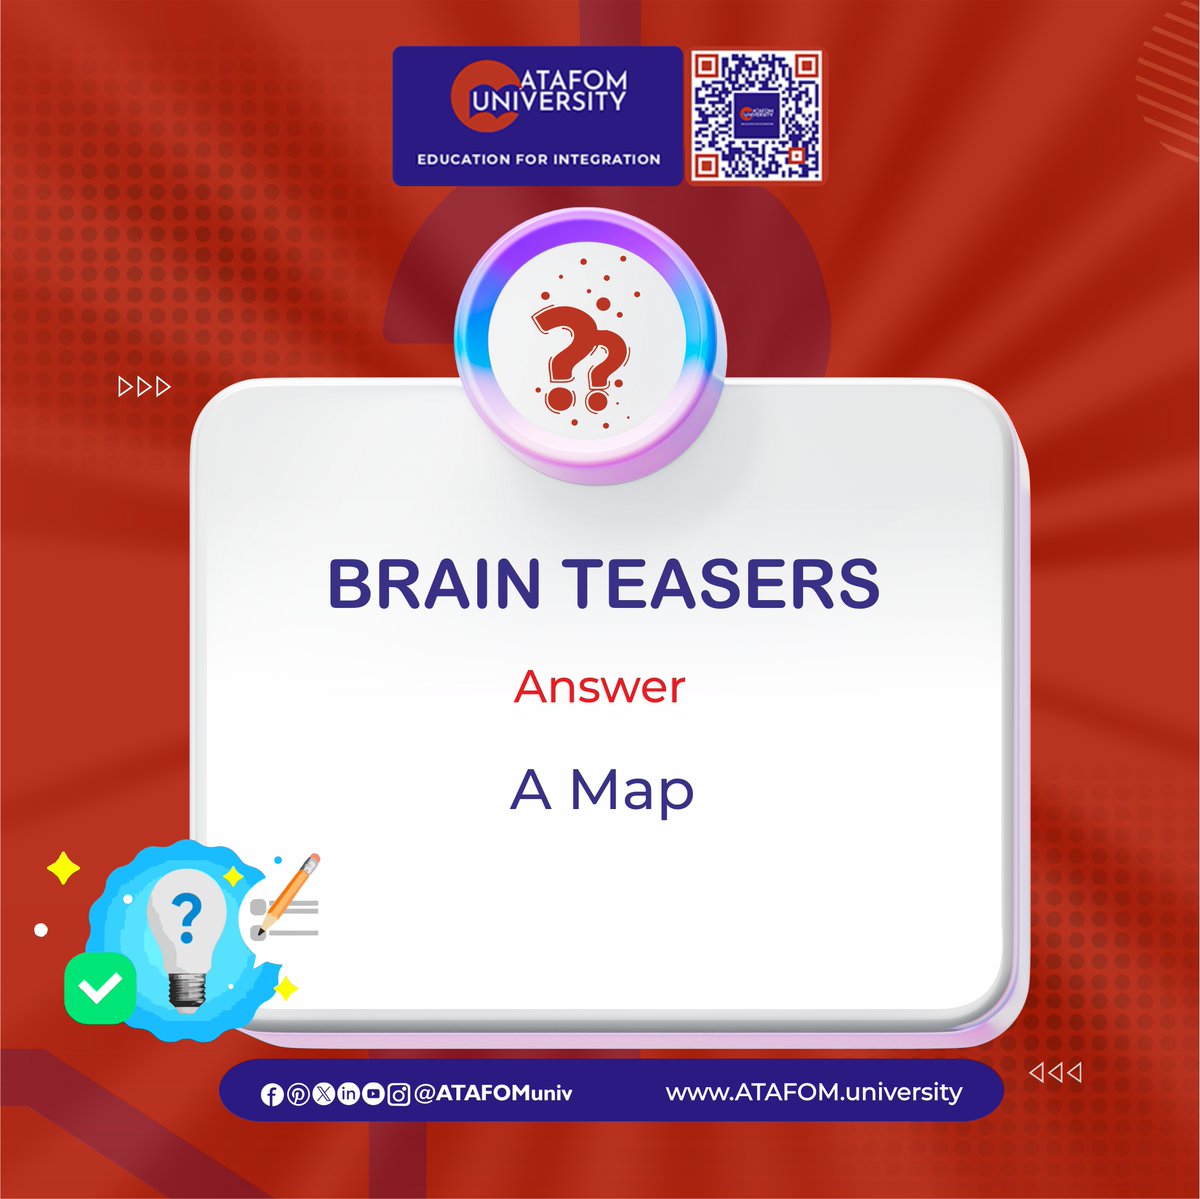 Exercise your mind with our latest brain teaser challenge!

Test your wits and sharpen your cognitive skills with ATAFOM University.

#BrainTeaser #MindChallenge #PuzzleFun #CriticalThinking #BrainGames #UniversityLife #ATAFOMonlinecampus #Learning #Education #Student